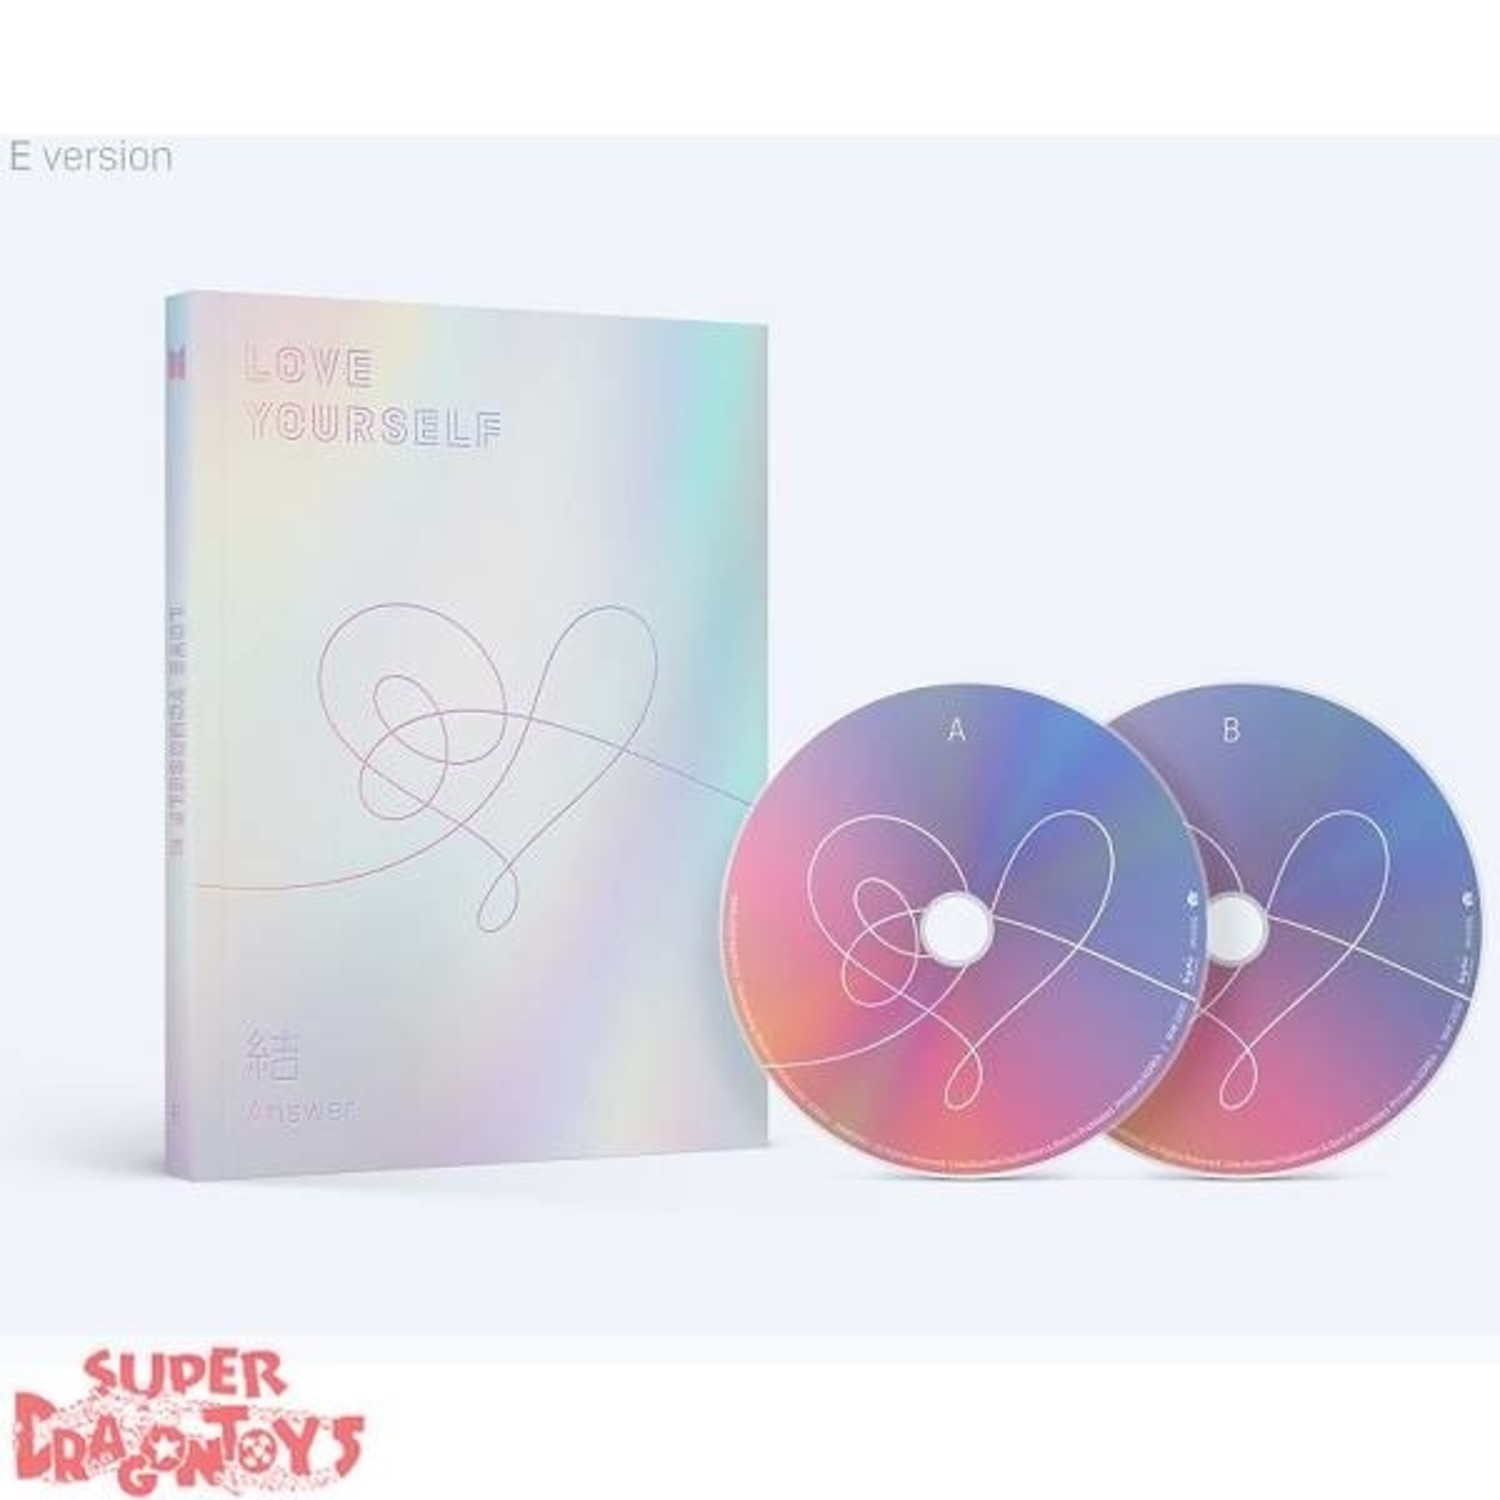 BTS - LOVE YOURSELF ANSWER - SPECIAL ALBUM - SUPERDRAGONTOYS